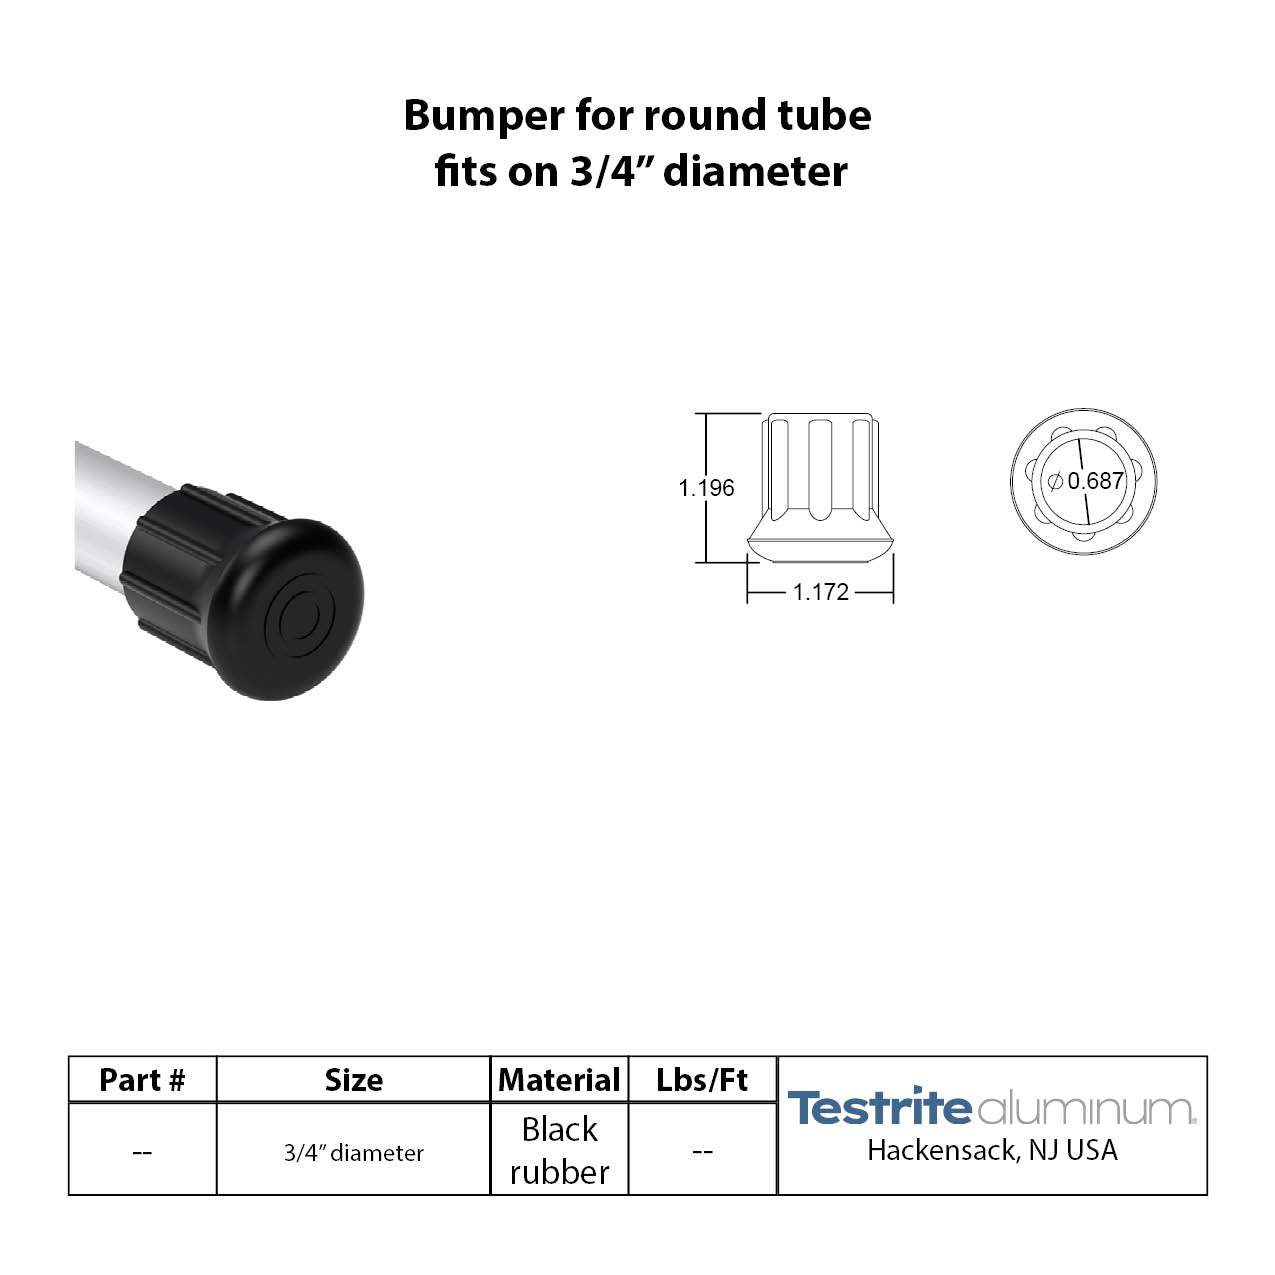 Crutch tips and rubber bumpers for round tubing